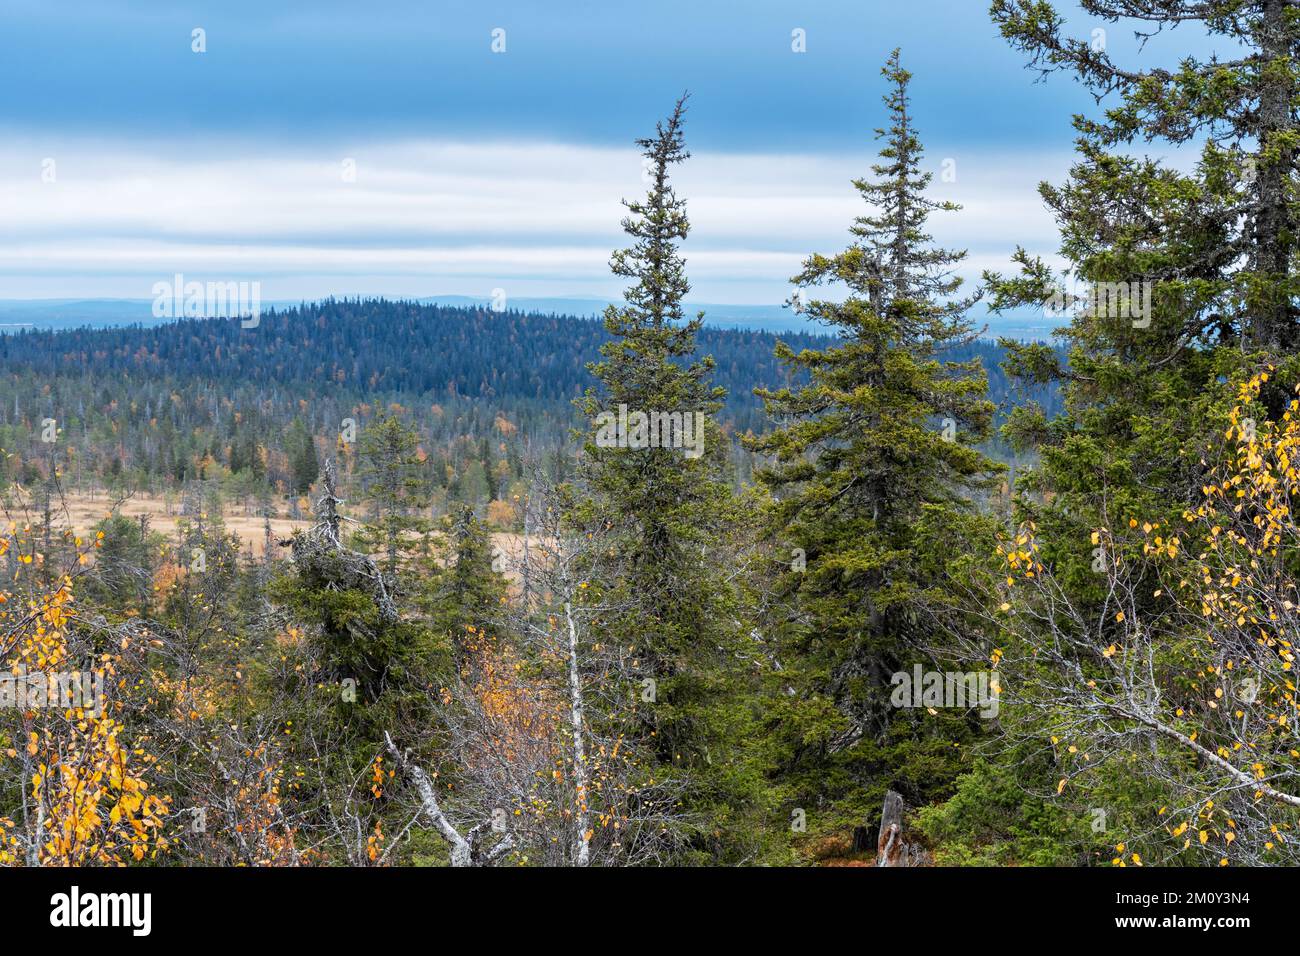 A view to an autumnal taiga landscape during a cloudy day in Riisitunturi National Park, Northern Finland Stock Photo